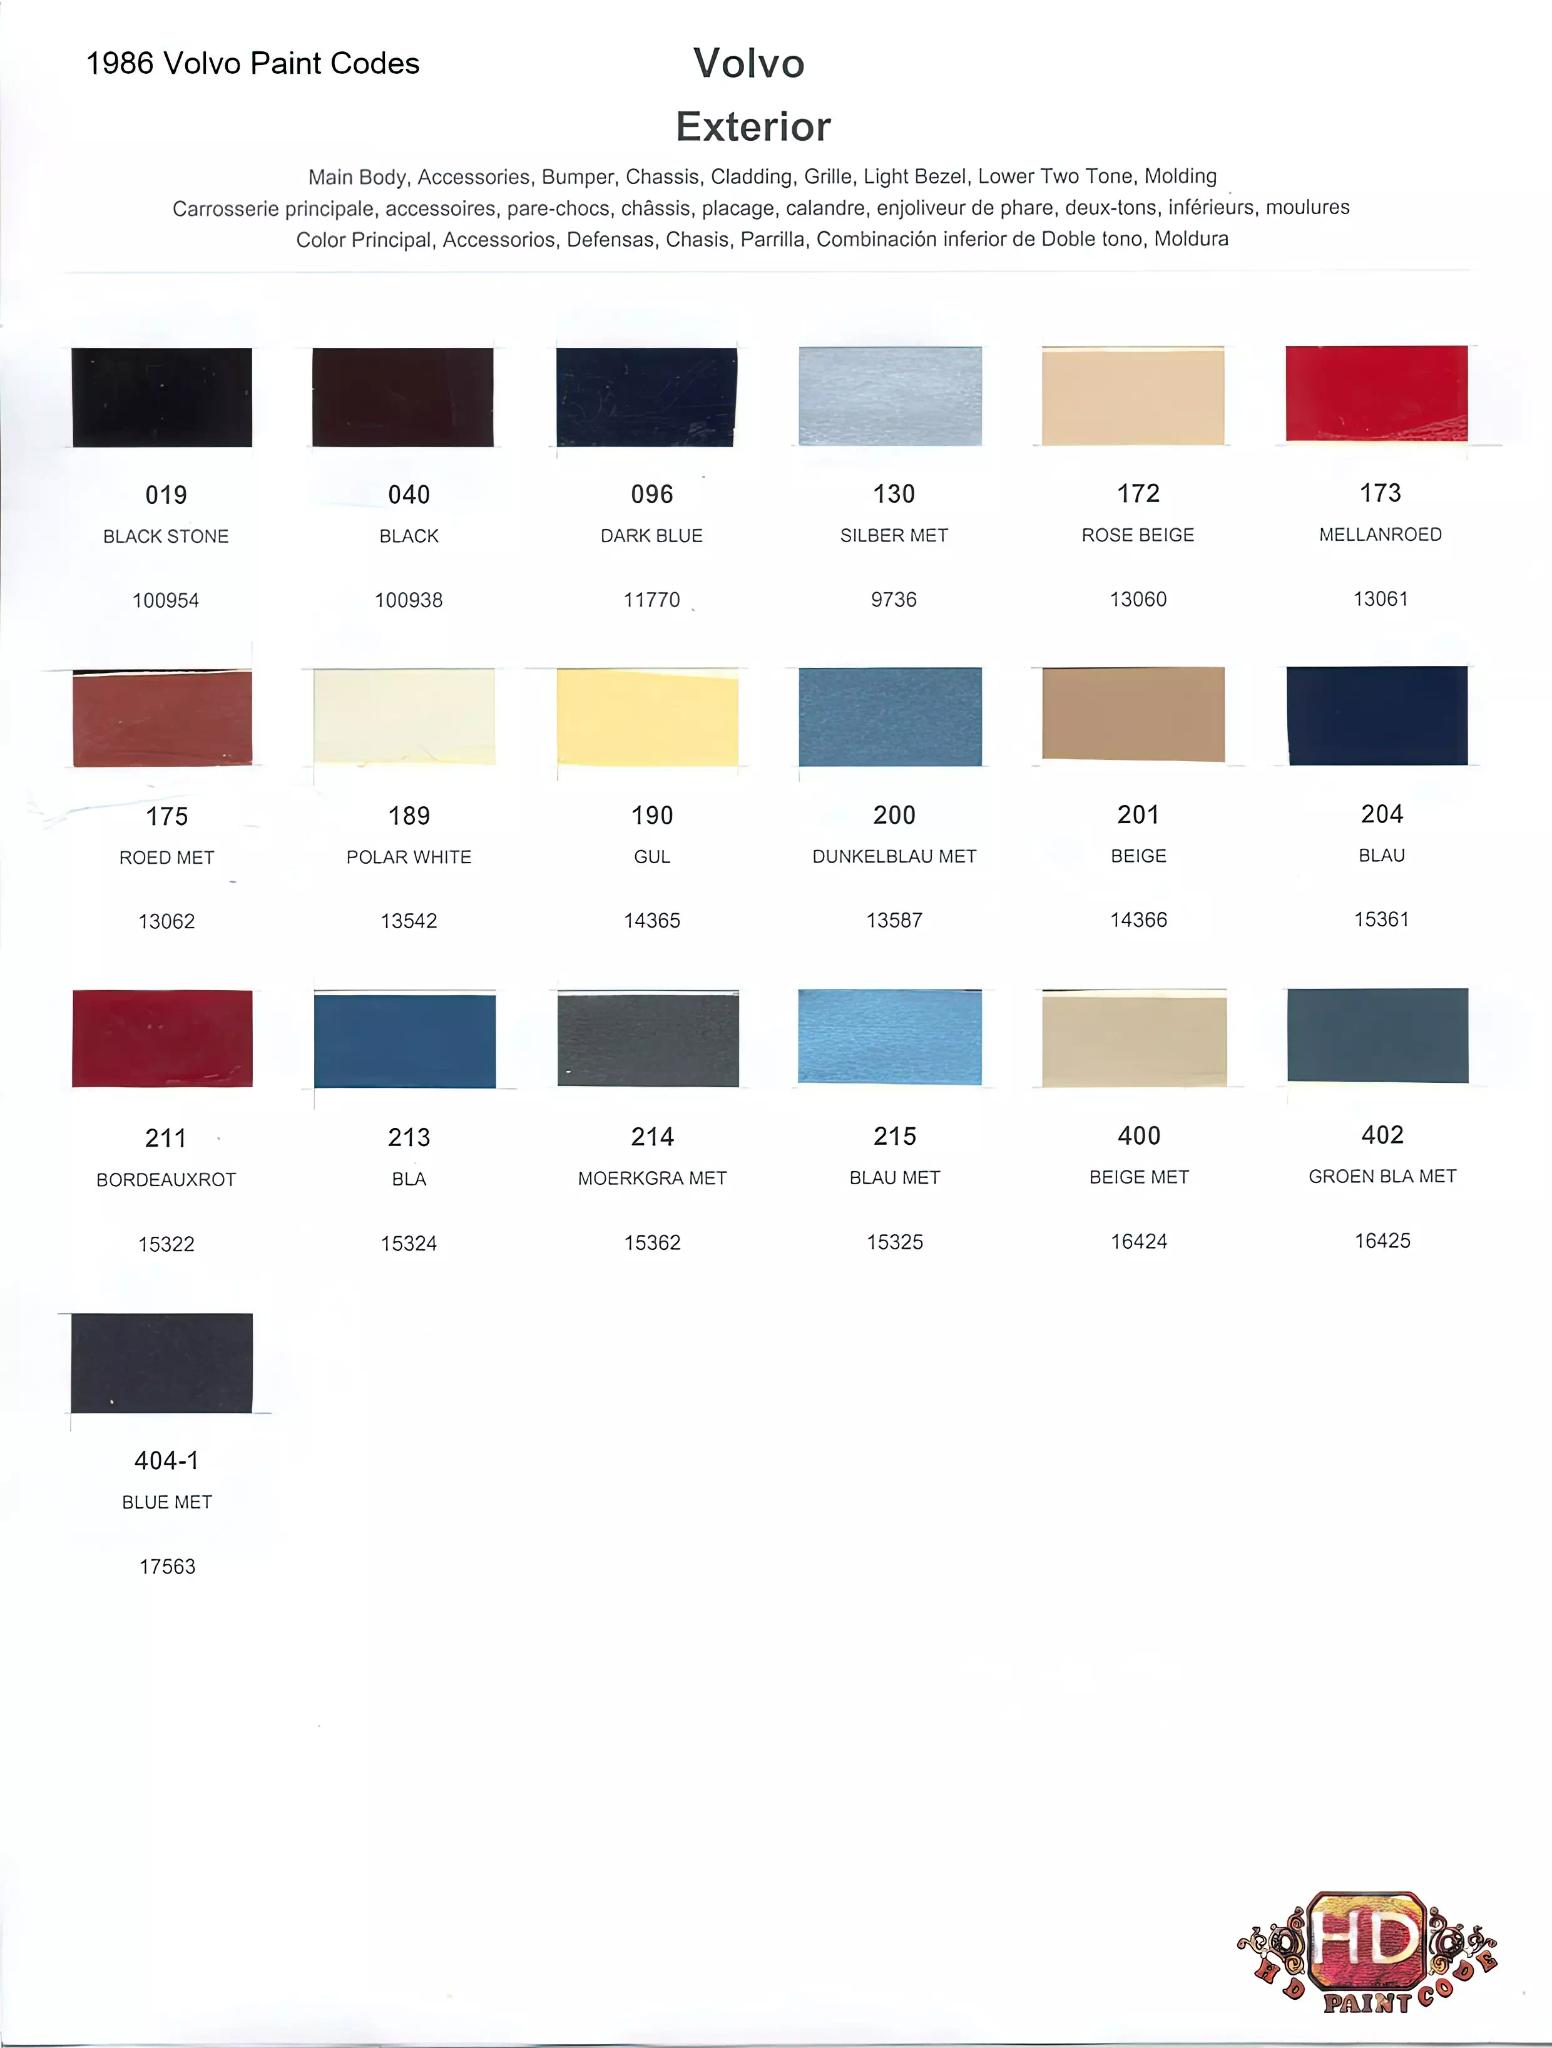 Oem numbers, Color names, rm and Glasurit stock numbers and color shade examples for 1986 Volvo exterior Paint Colors